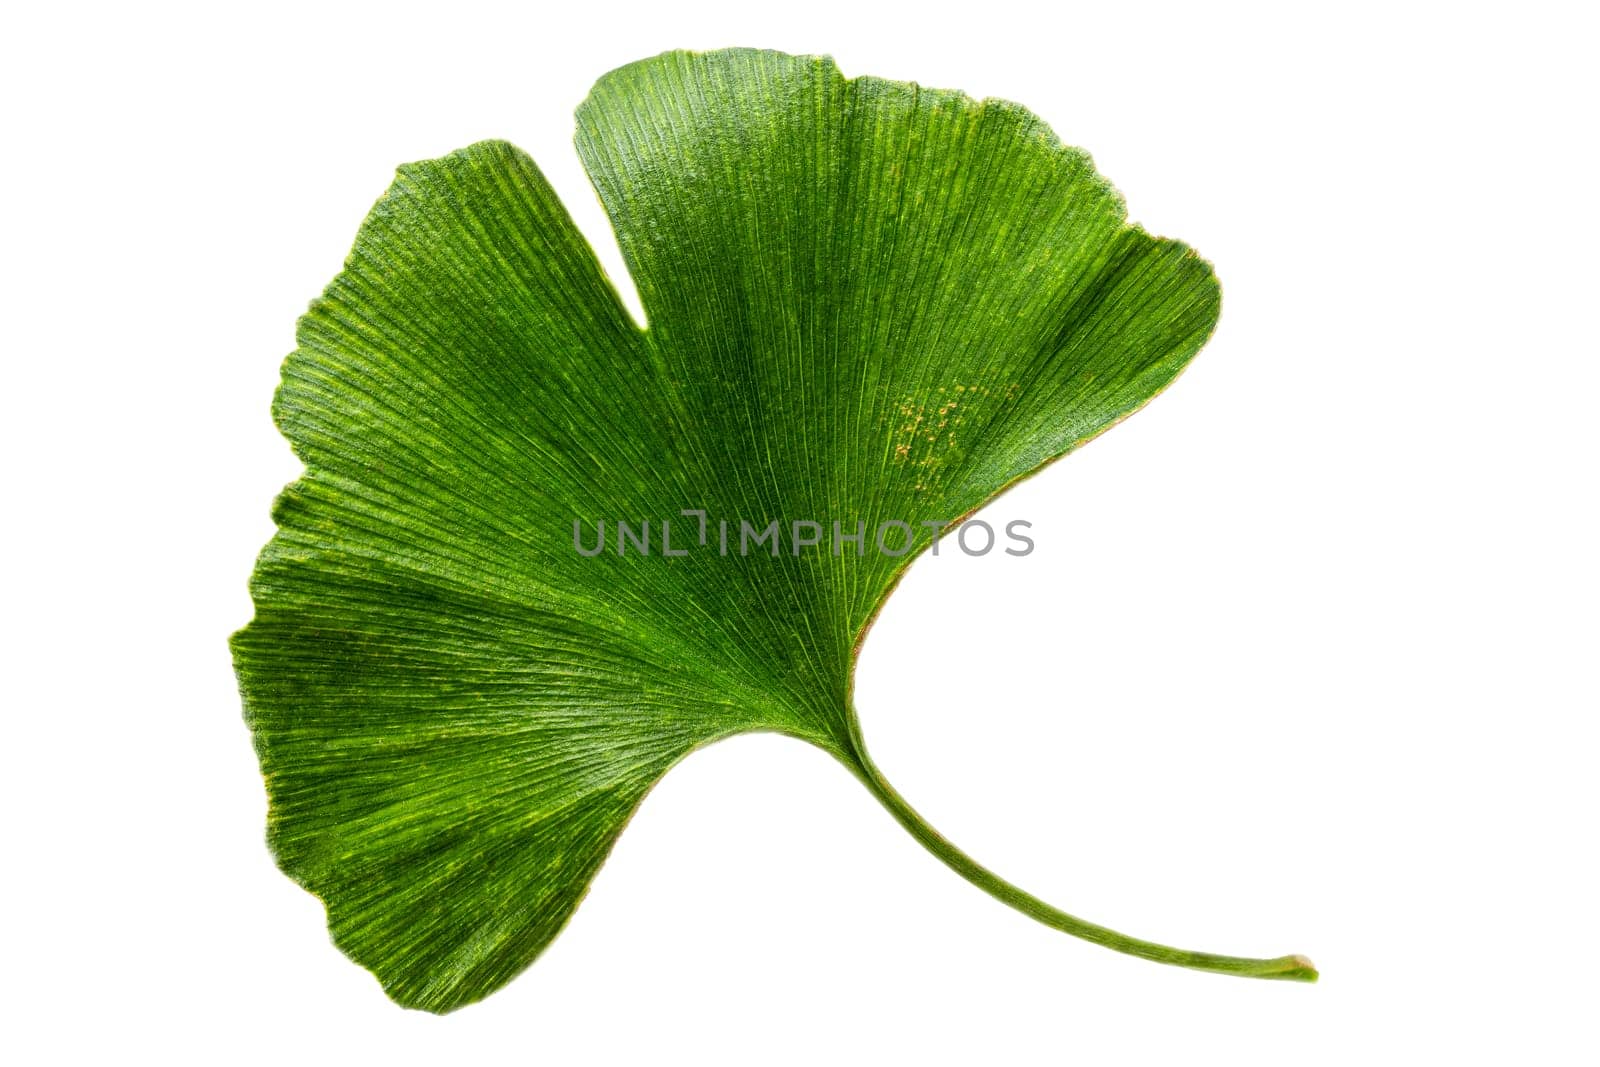 fresh leaves of the ginkgo biloba tree as part of natural medicine on white bacground by JPC-PROD